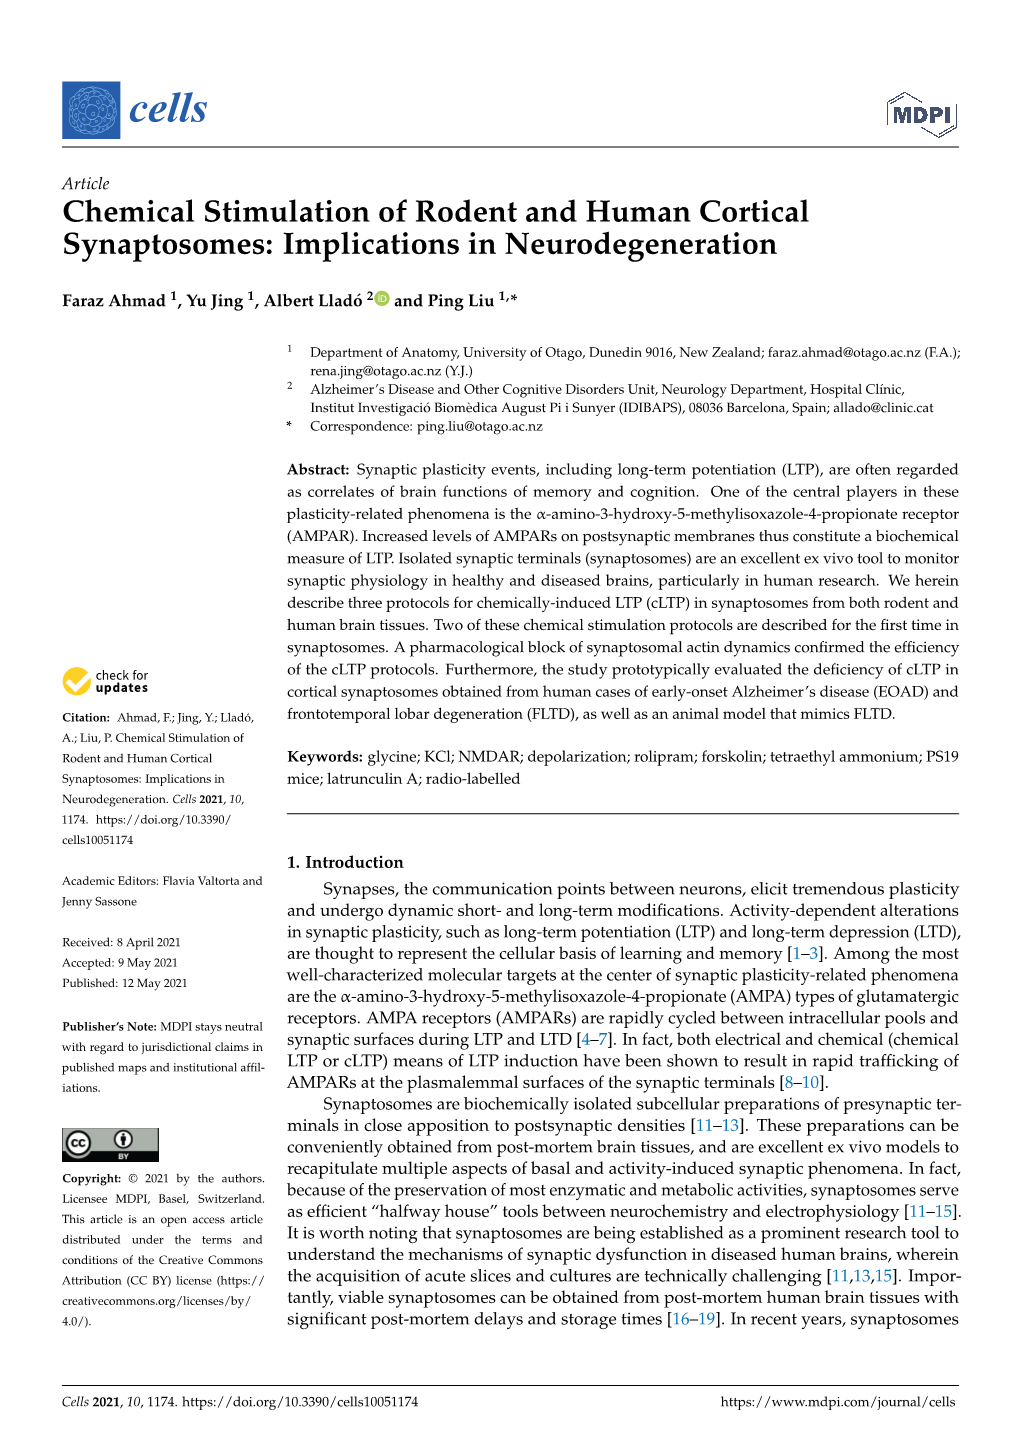 Chemical Stimulation of Rodent and Human Cortical Synaptosomes: Implications in Neurodegeneration